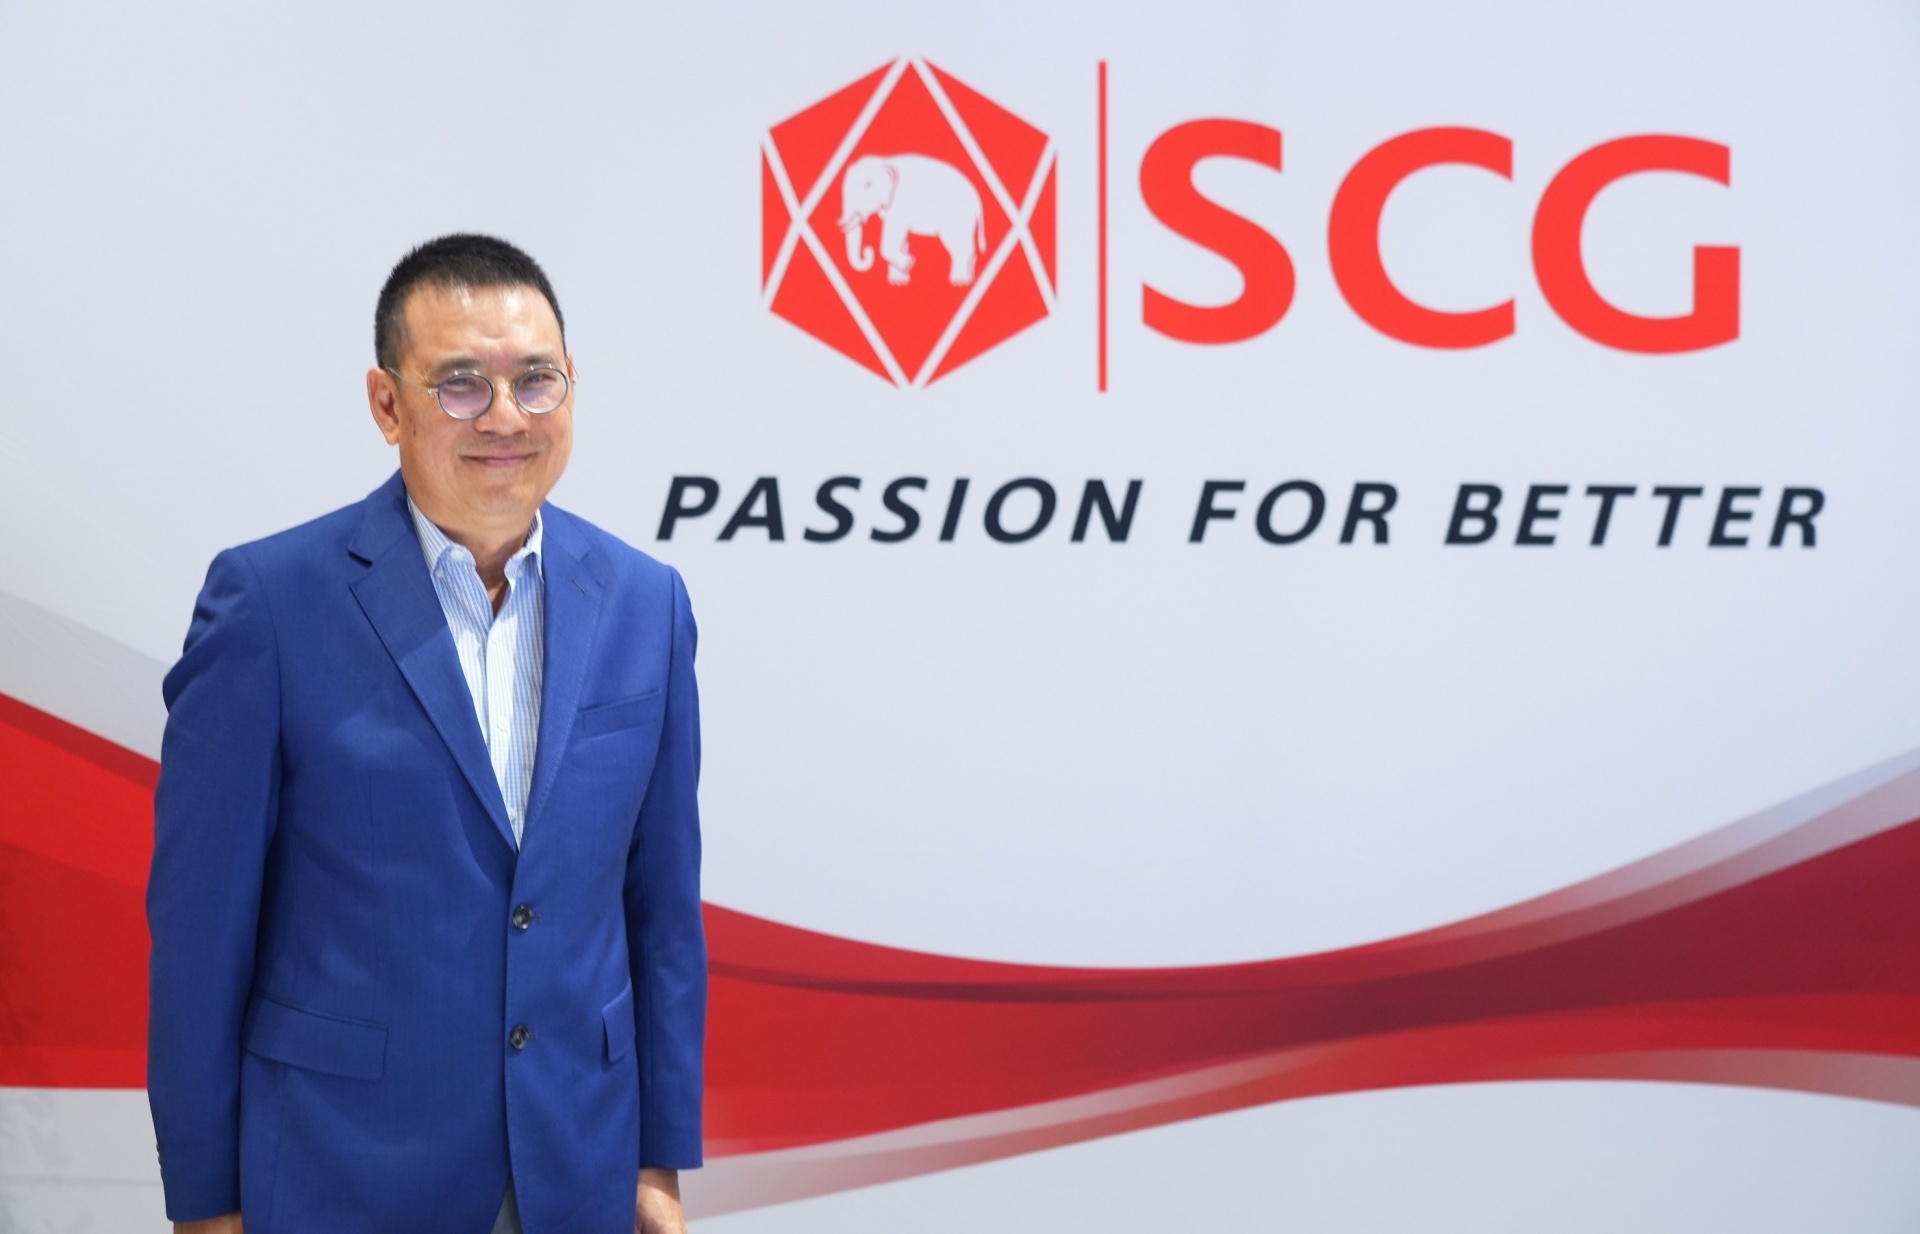 SCG posts strong operating results in 2021 despite inflation and COVID-19